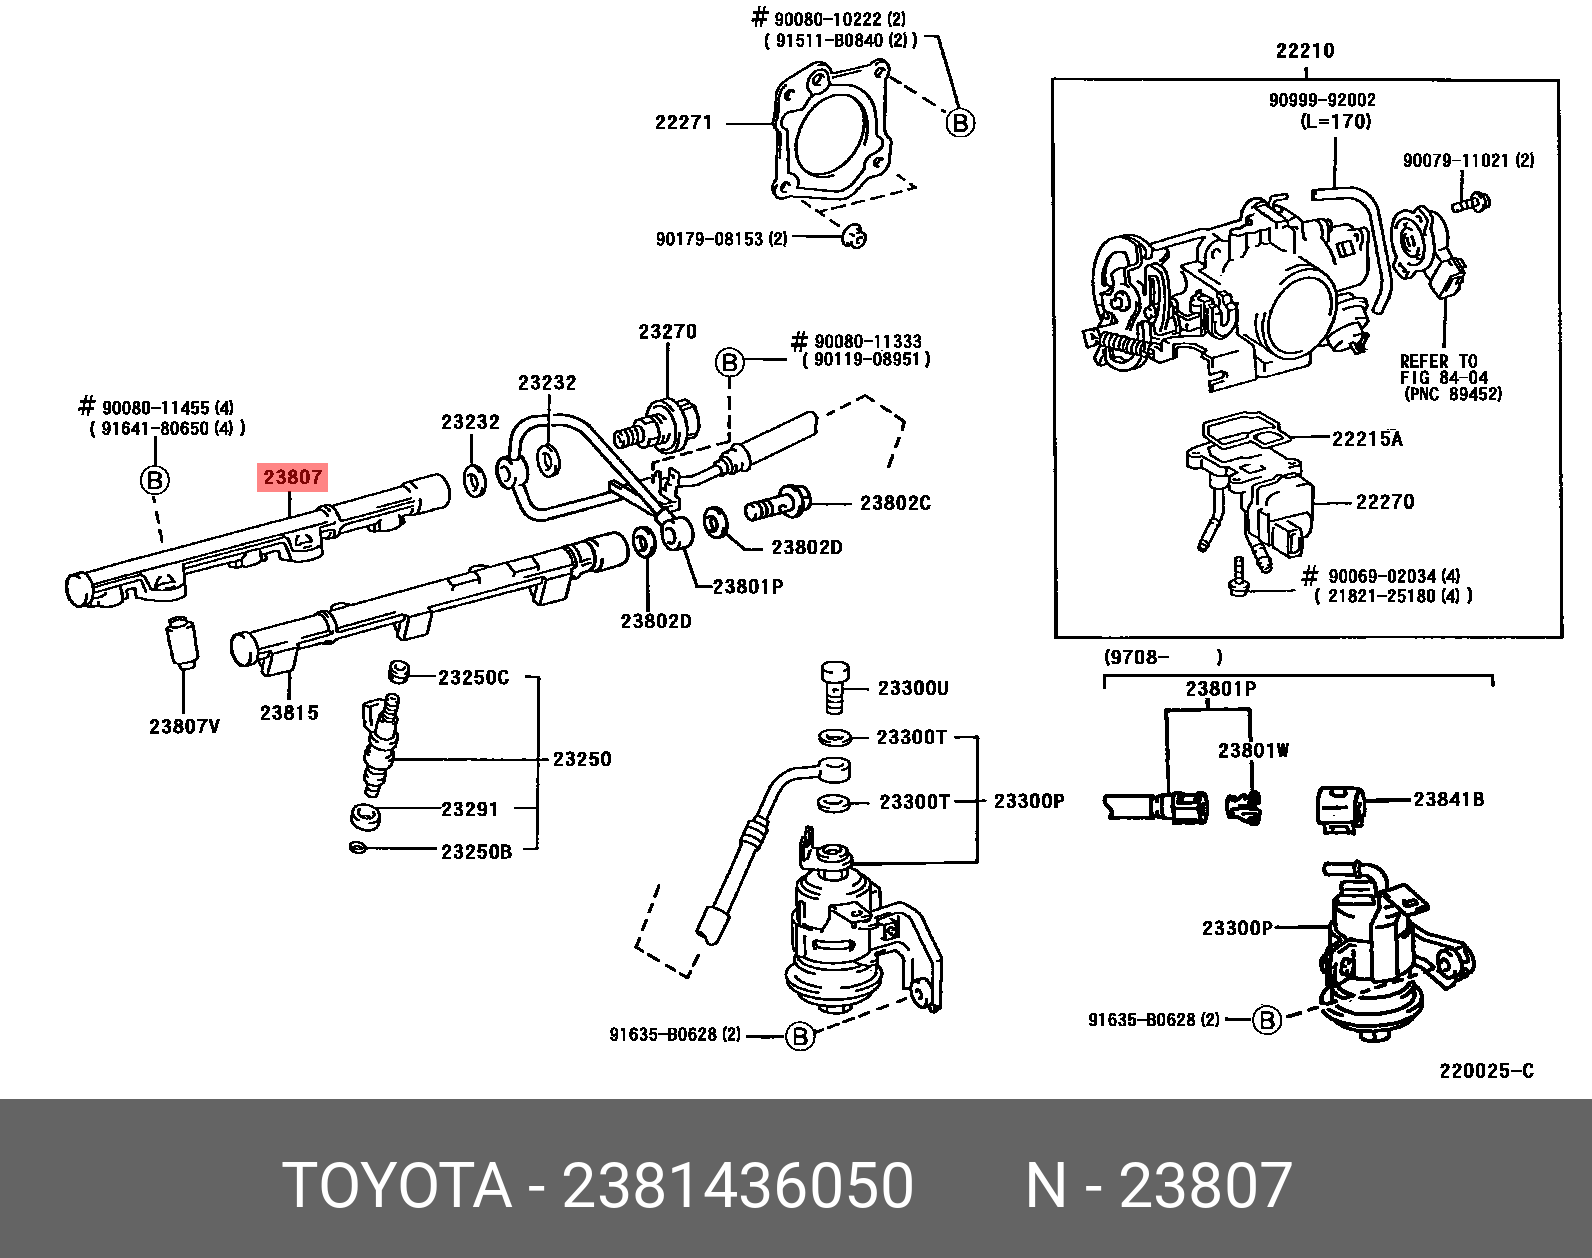 CAMRY HYBRID 201108 - 201704, PIPE SUB-ASSY, FUEL DELIVERY